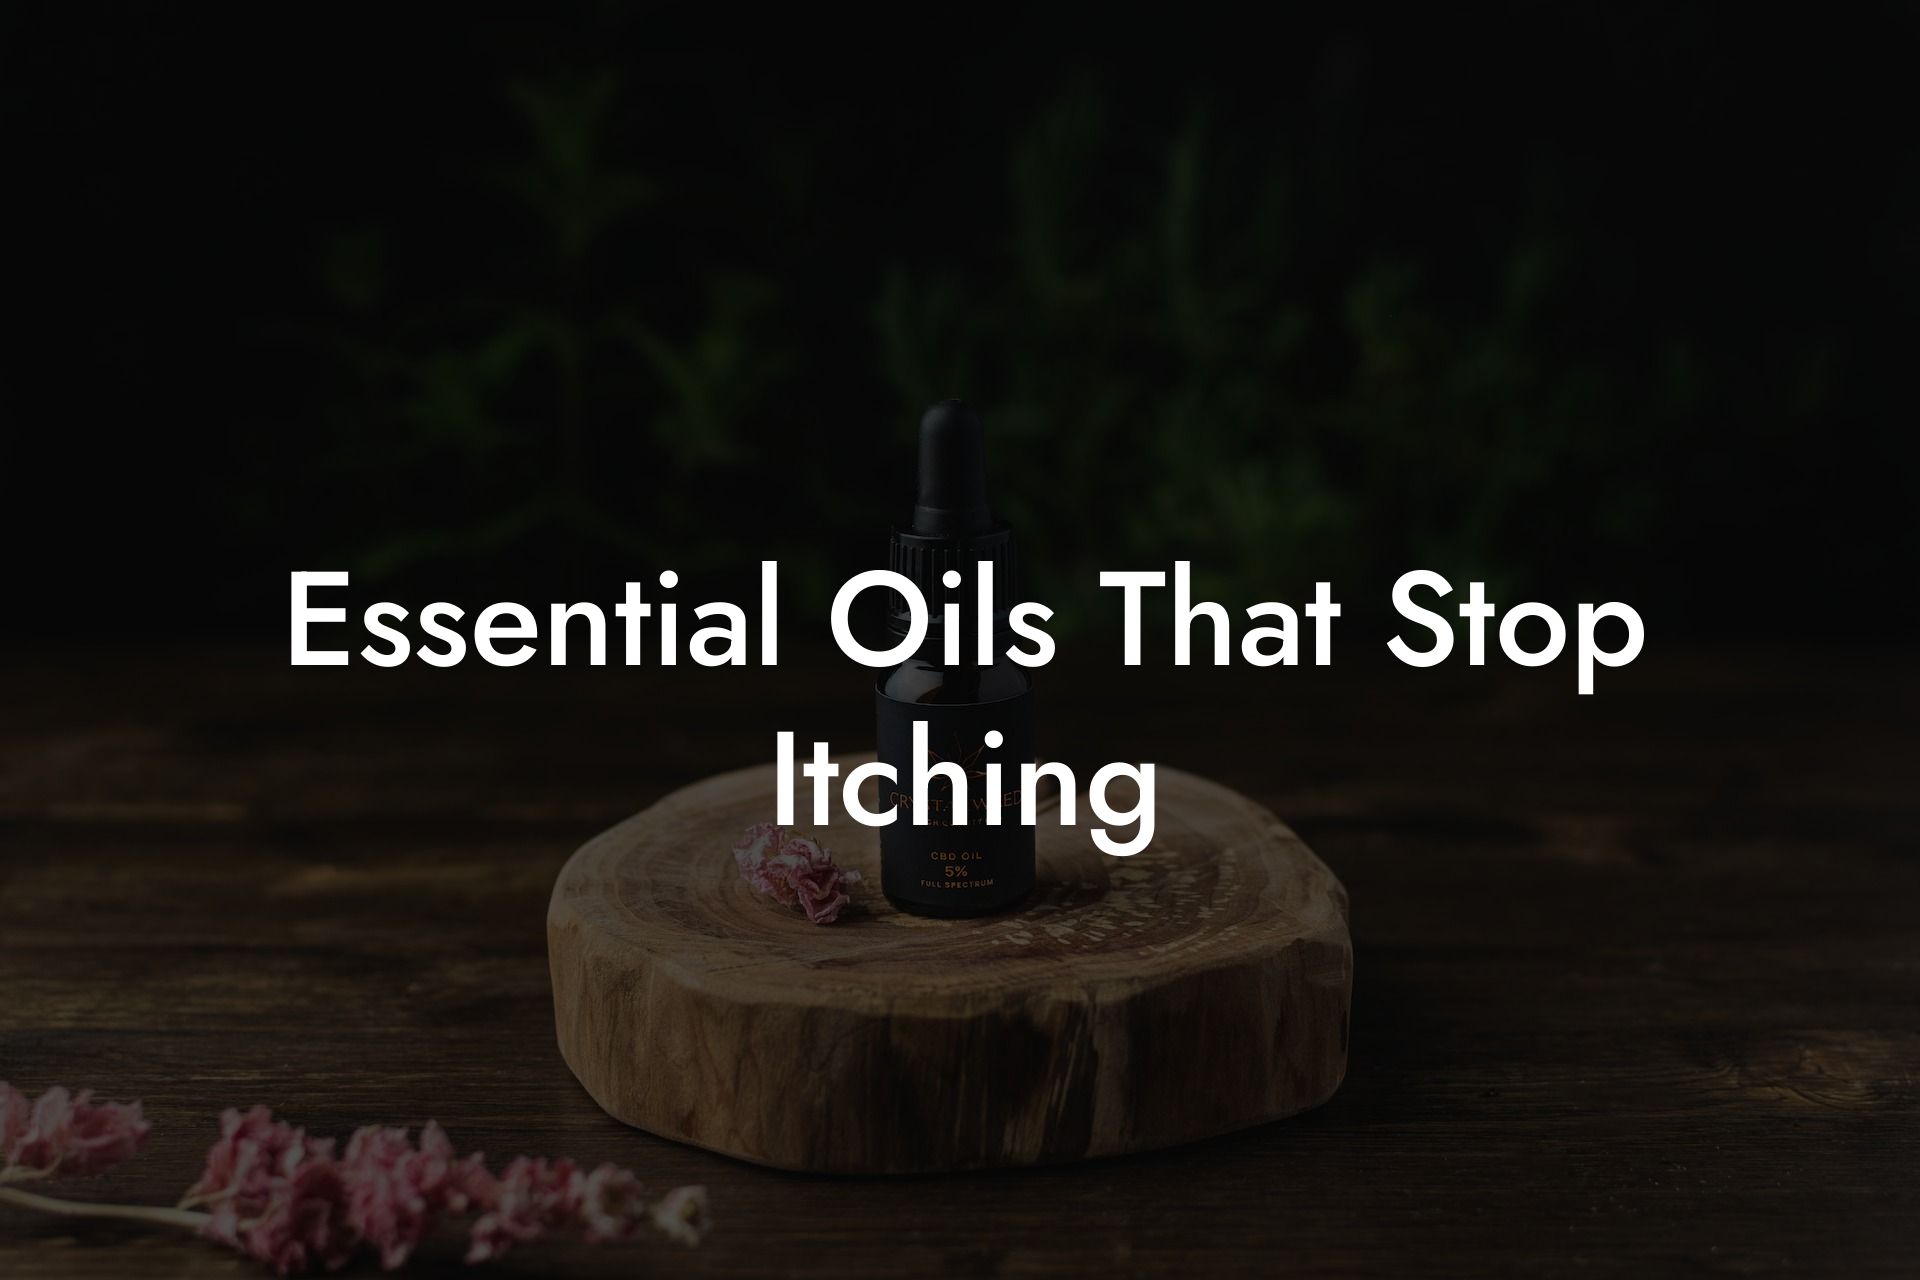 Essential Oils That Stop Itching